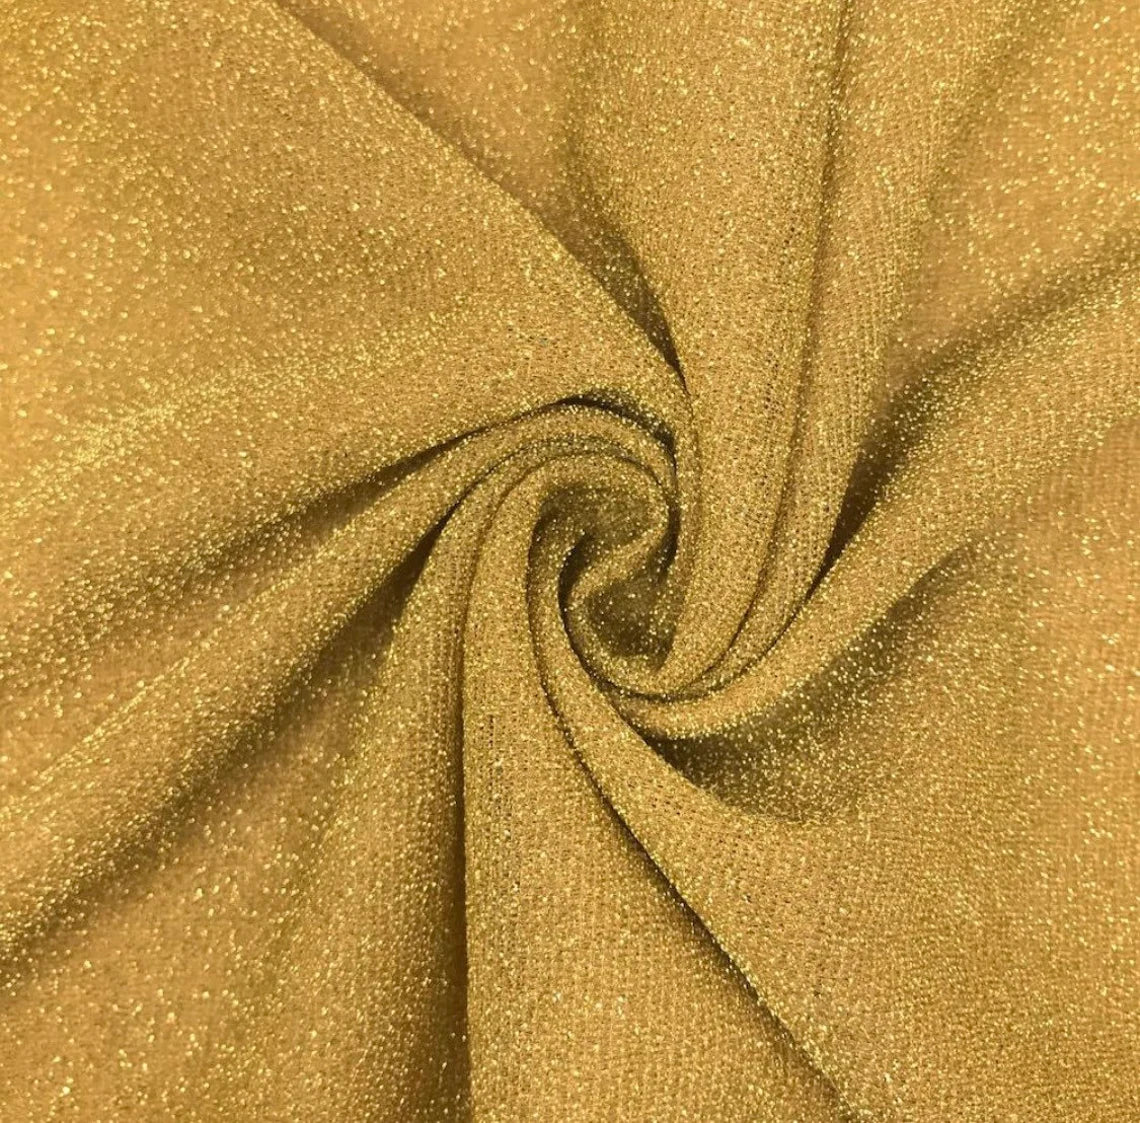 Shimmer Glitter Fabric - Gold - Luxury Sparkle Stretch Solid Fabric So